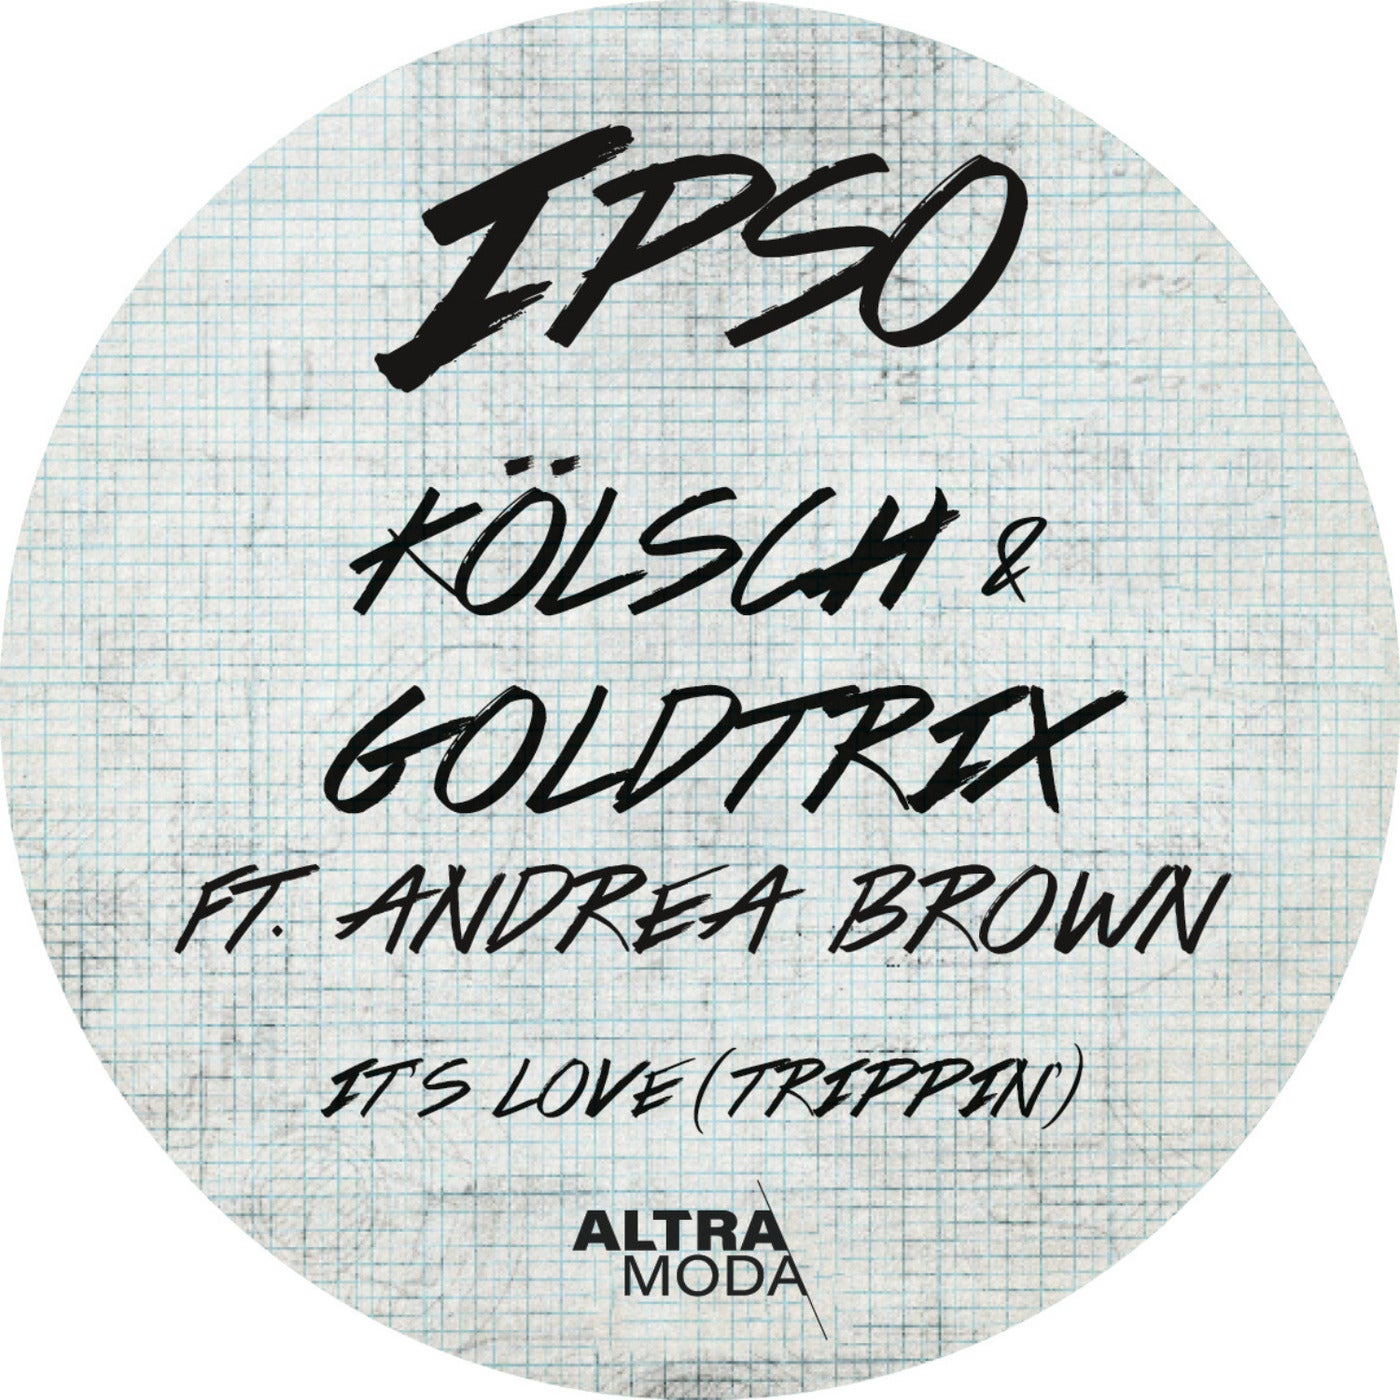 image cover: Goldtrix, Kolsch, Andrea Brown - It's Love (Trippin') - Extended Mix on Altra Moda